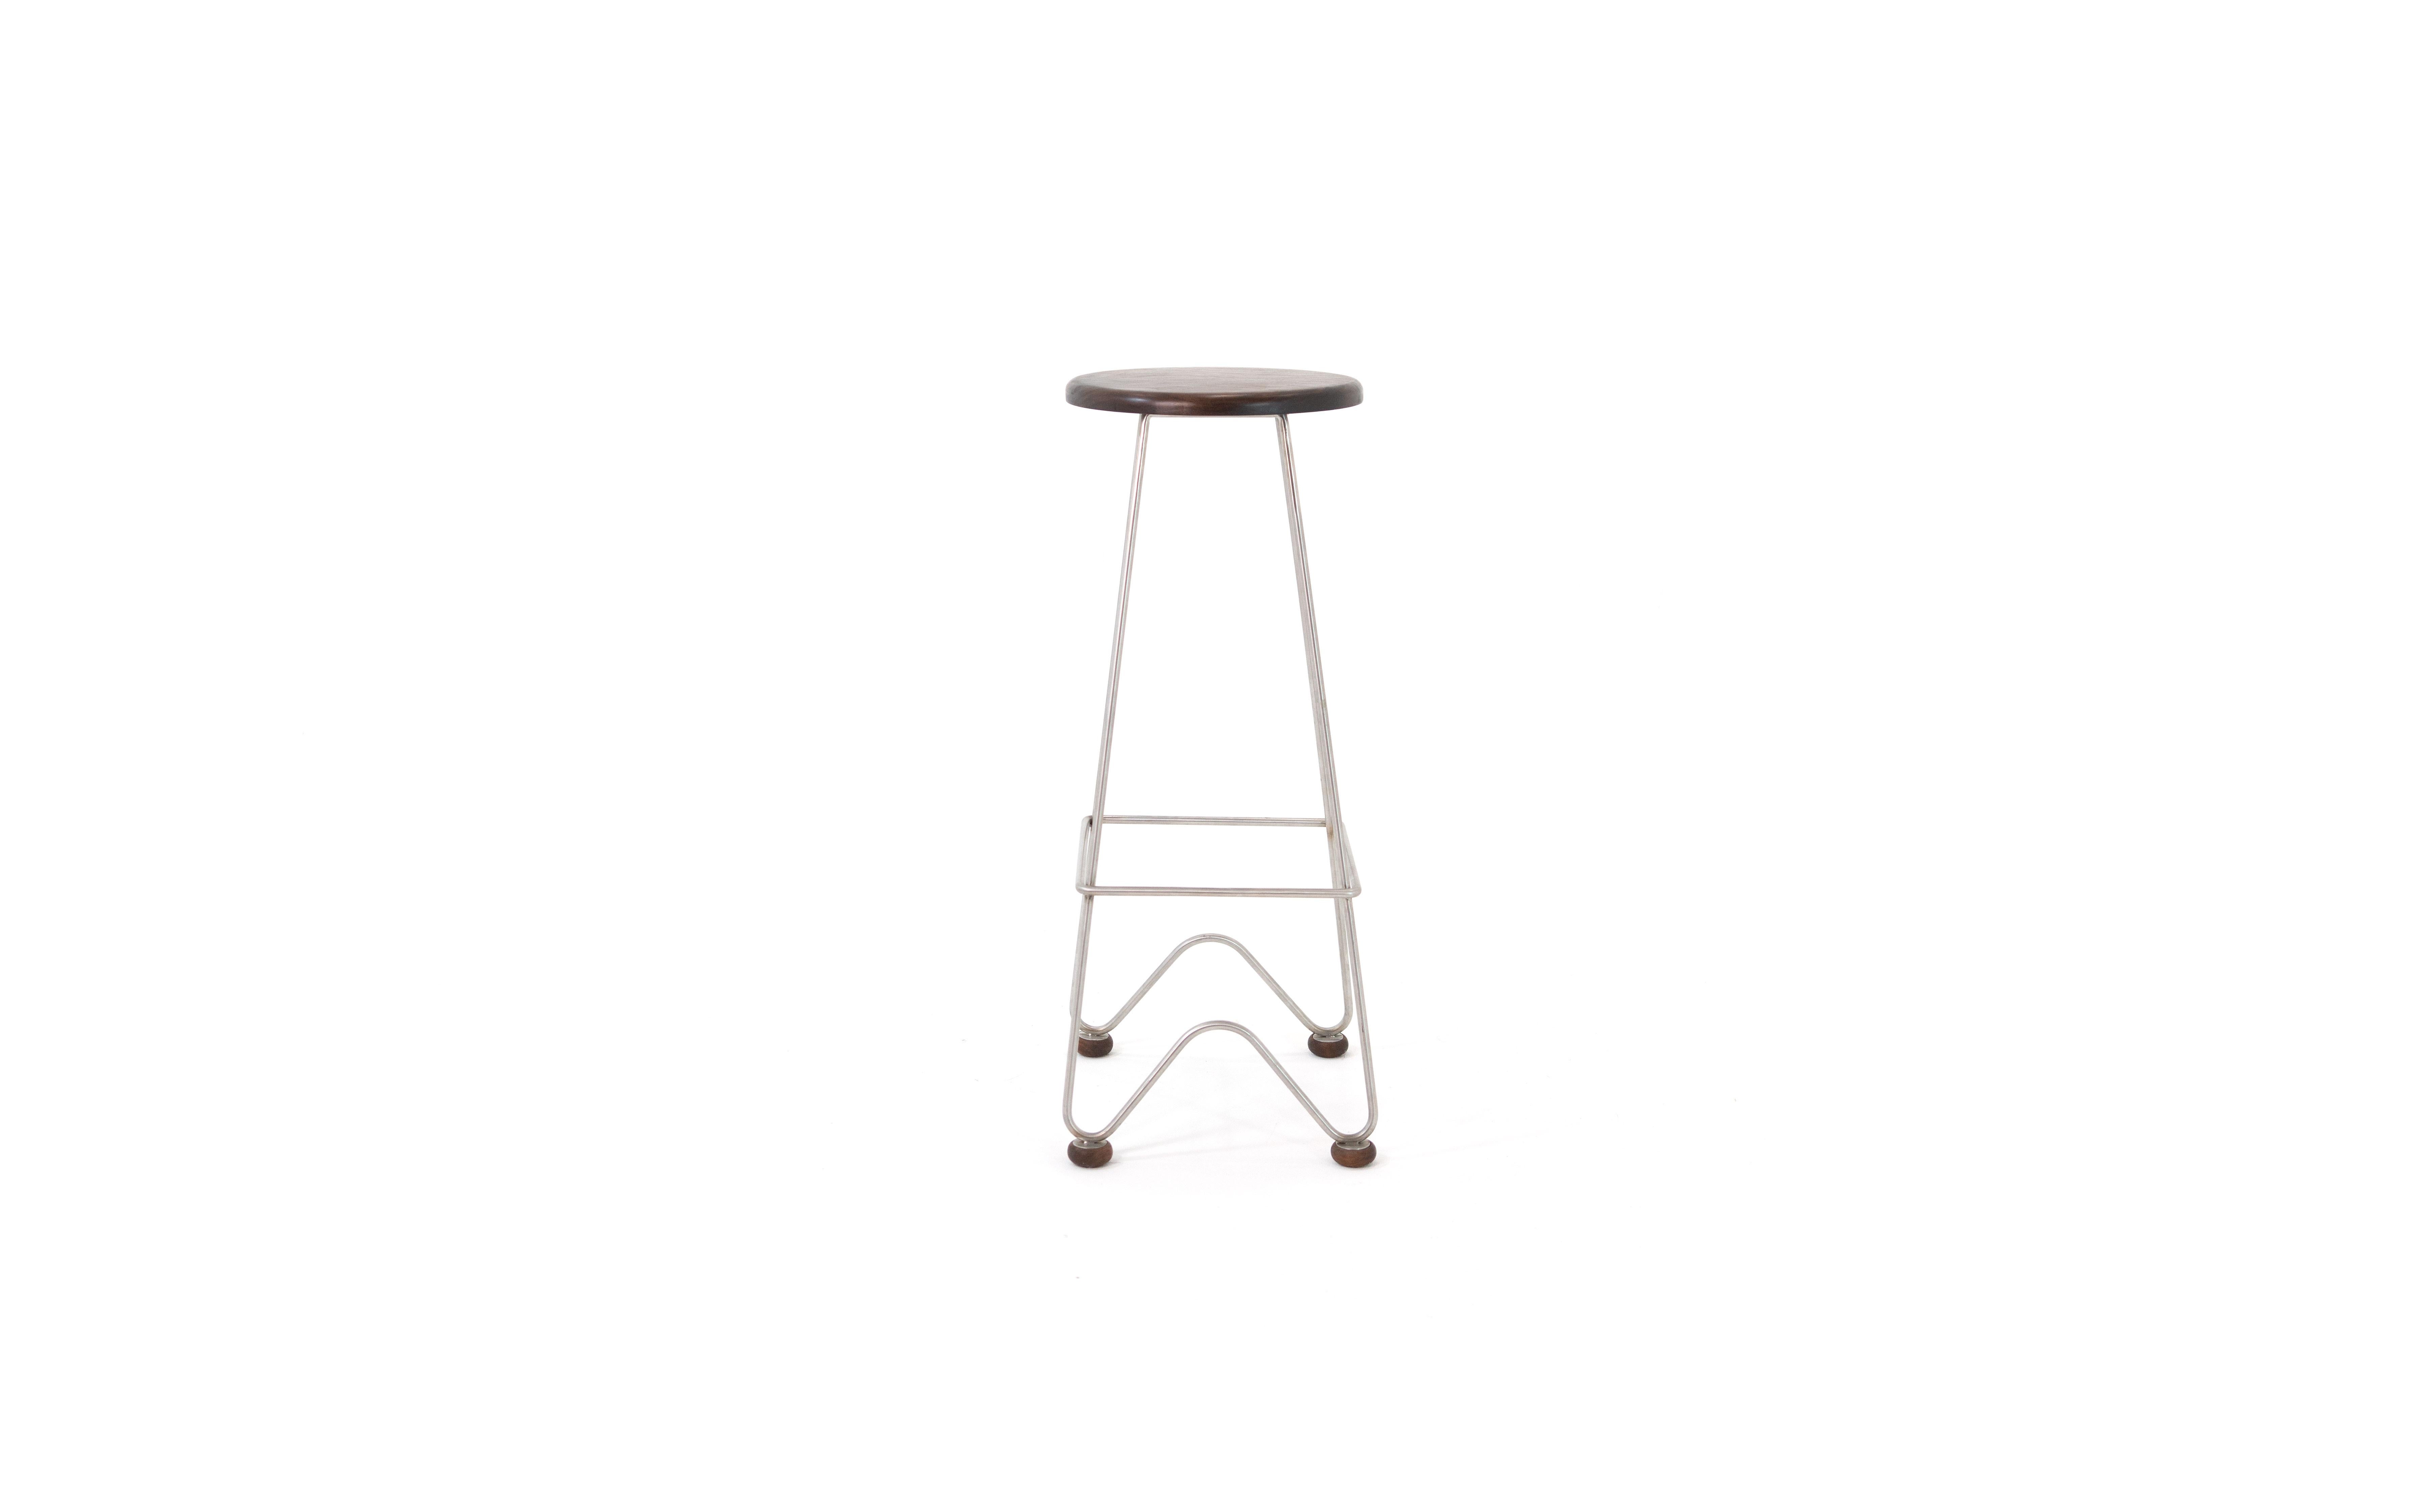 The fish stool is a high bar stool featuring hand-bent fishtail legs in stainless steel and a solid wood seat. The stool rests on solid wood castors to protect the floor.

This handcrafted piece is hand-oiled using house-blended oils and